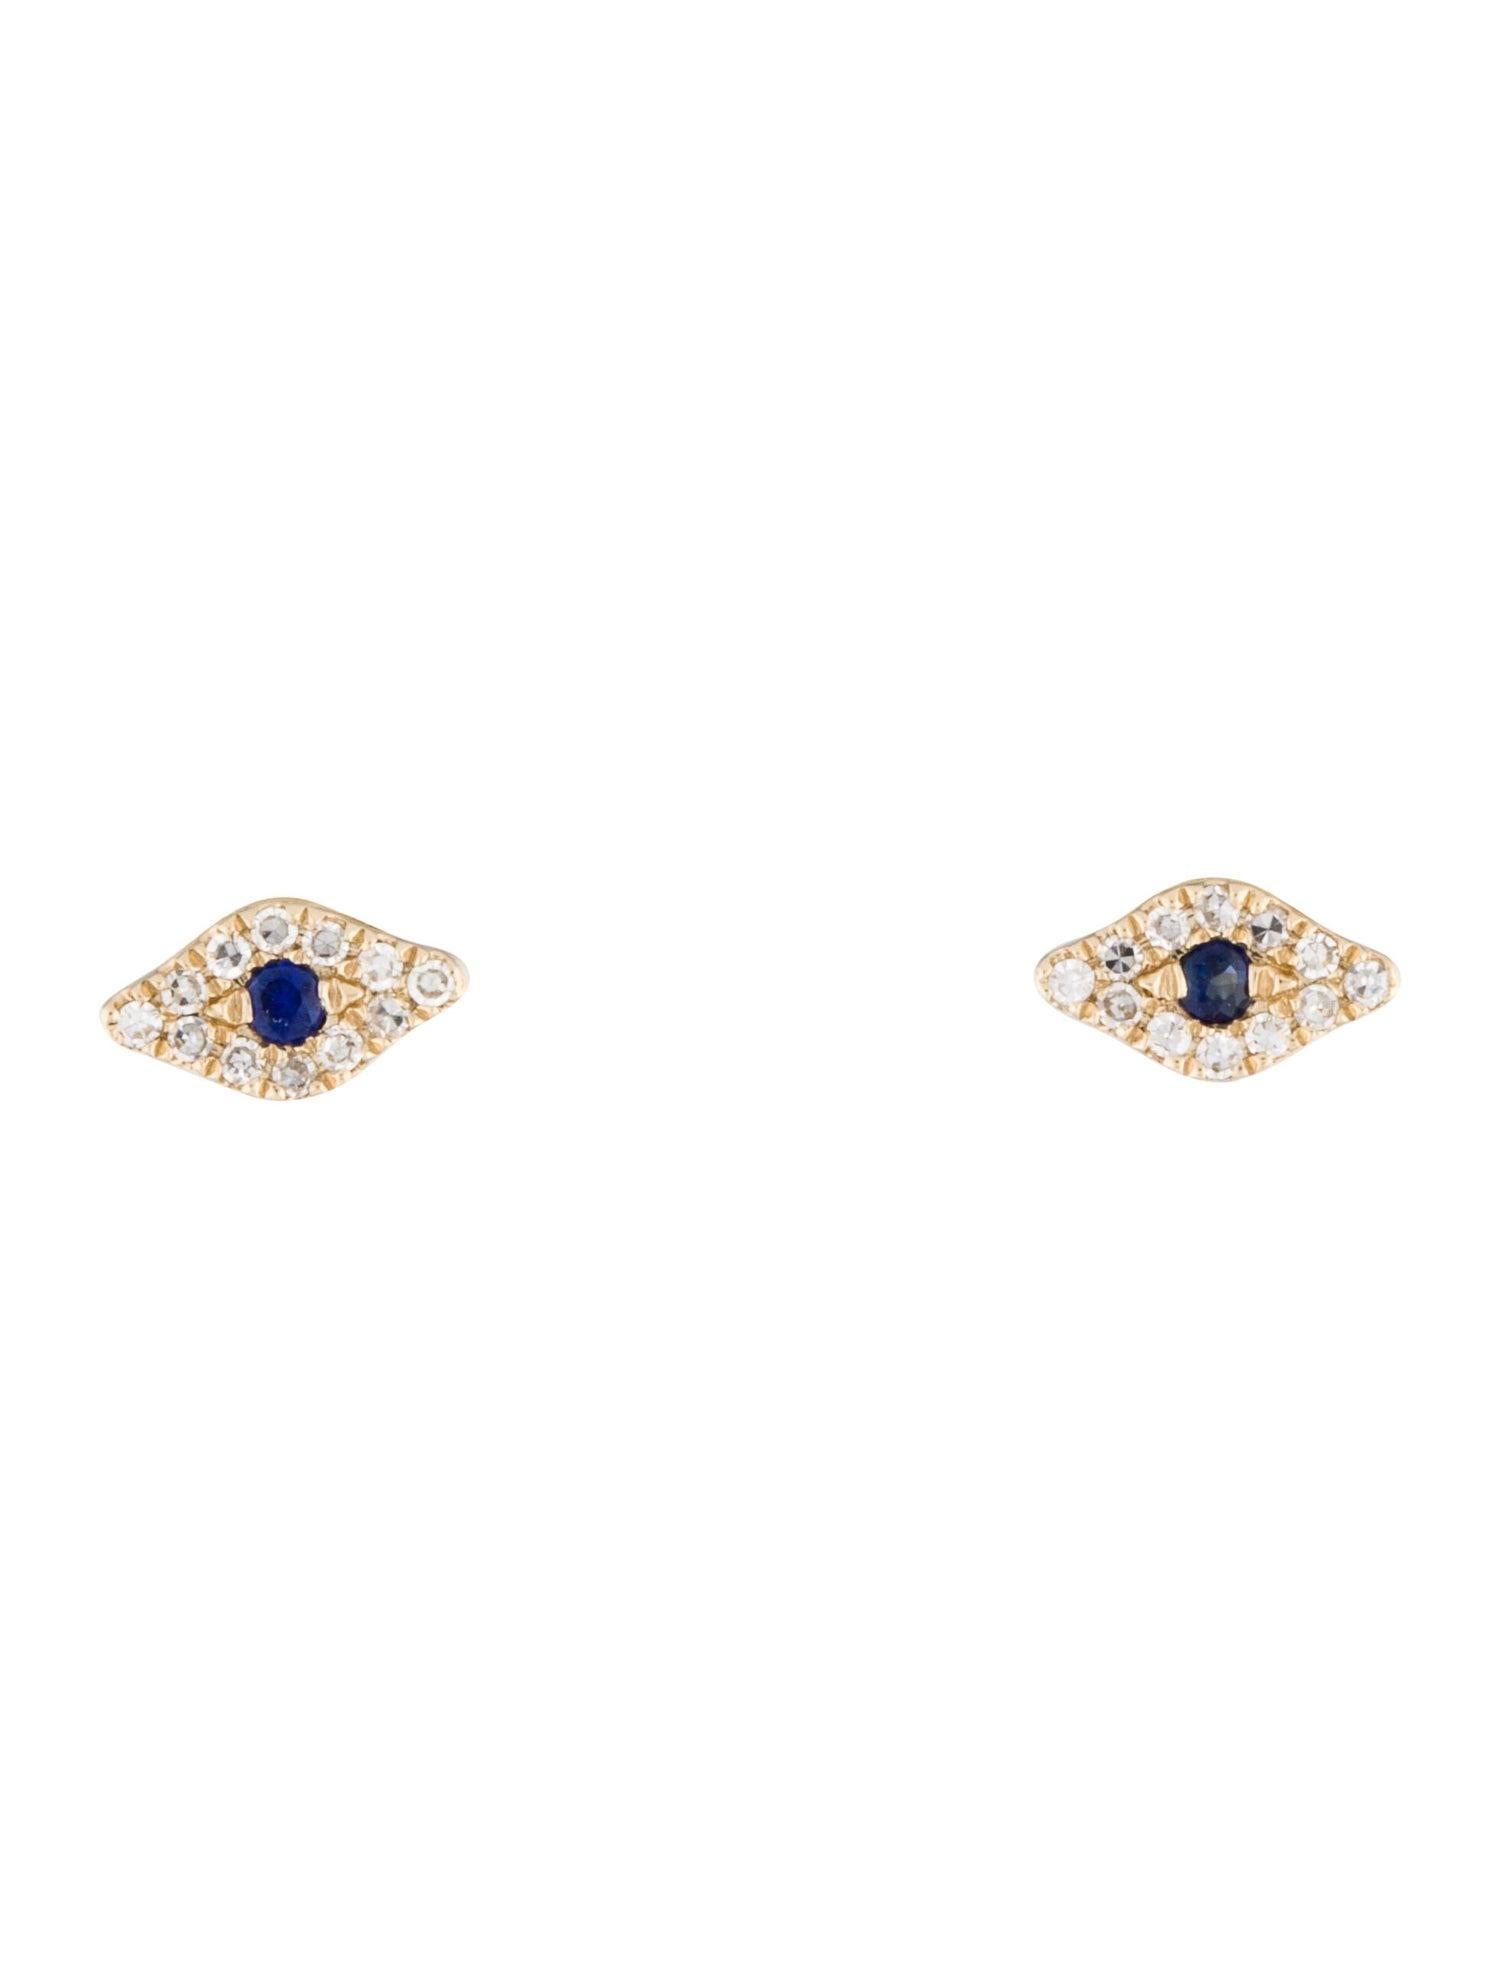  Evil Eye Design Earrings: Made from real 14k gold and round diamonds approximately 0.06 ct. 24 Certified diamonds and 2 Blue Sapphire 0.06 ct. available in white, rose and yellow gold with a color and clarity of GH-SI. 
 Surprise Your Loved Ones